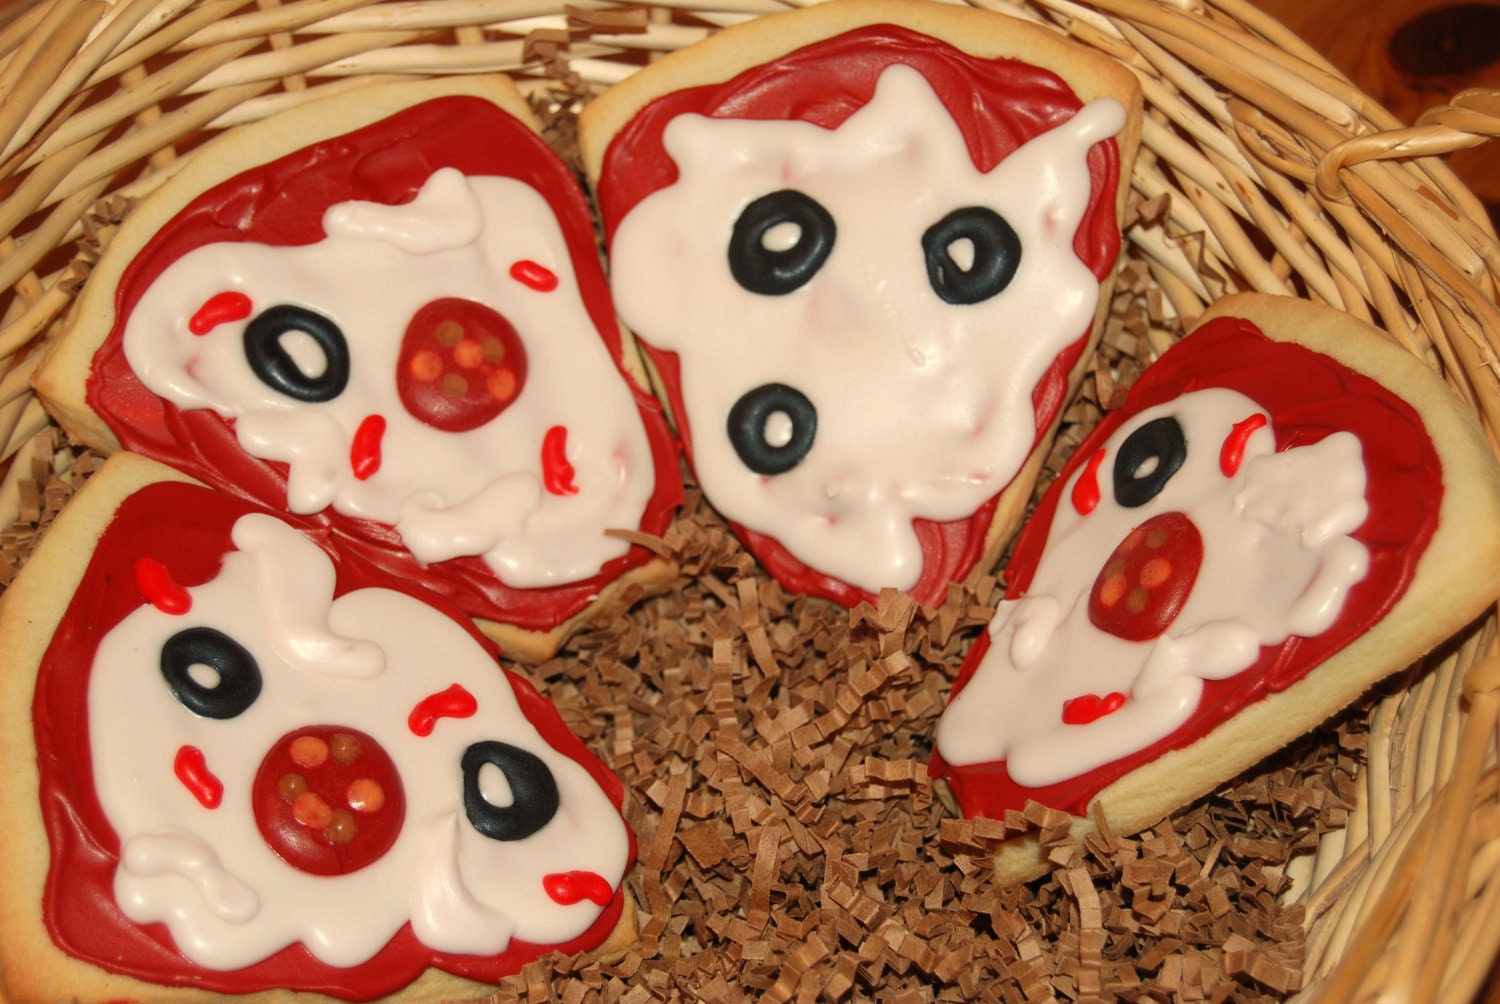 PIZZA PARTY - 1 dozen 4" slices of pizza - decorated sugar cookies